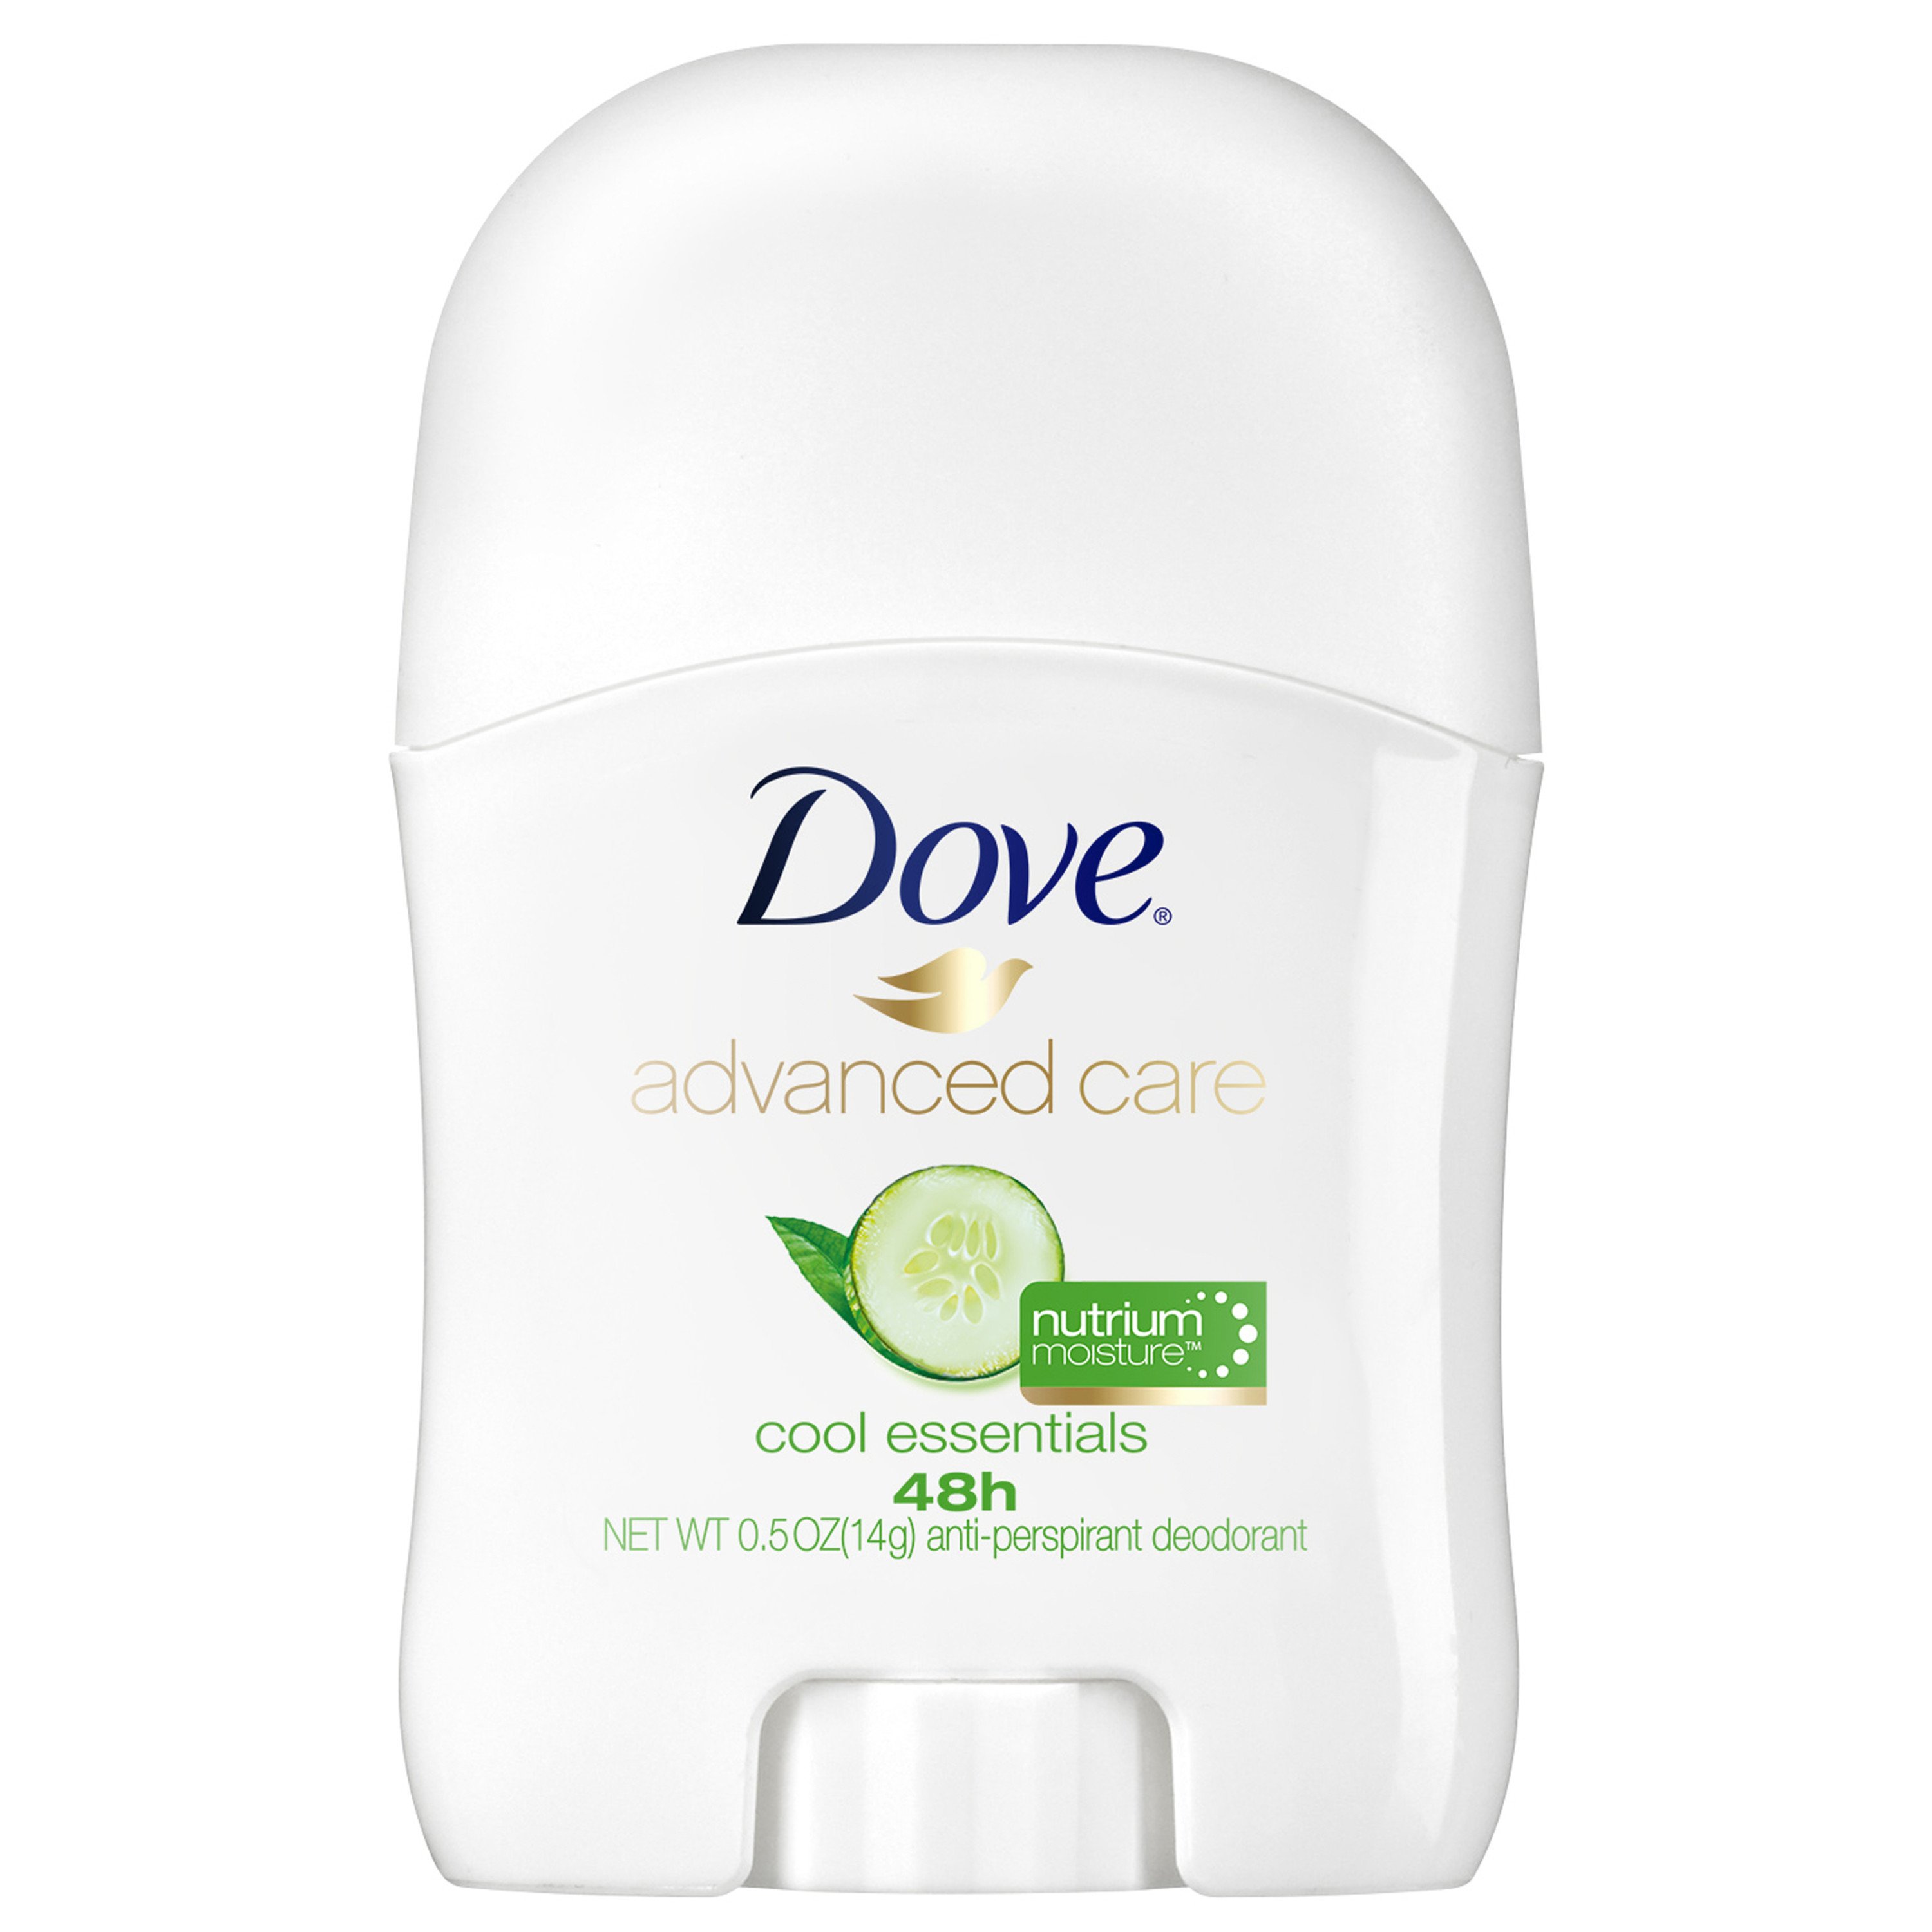 travel size unscented deodorant